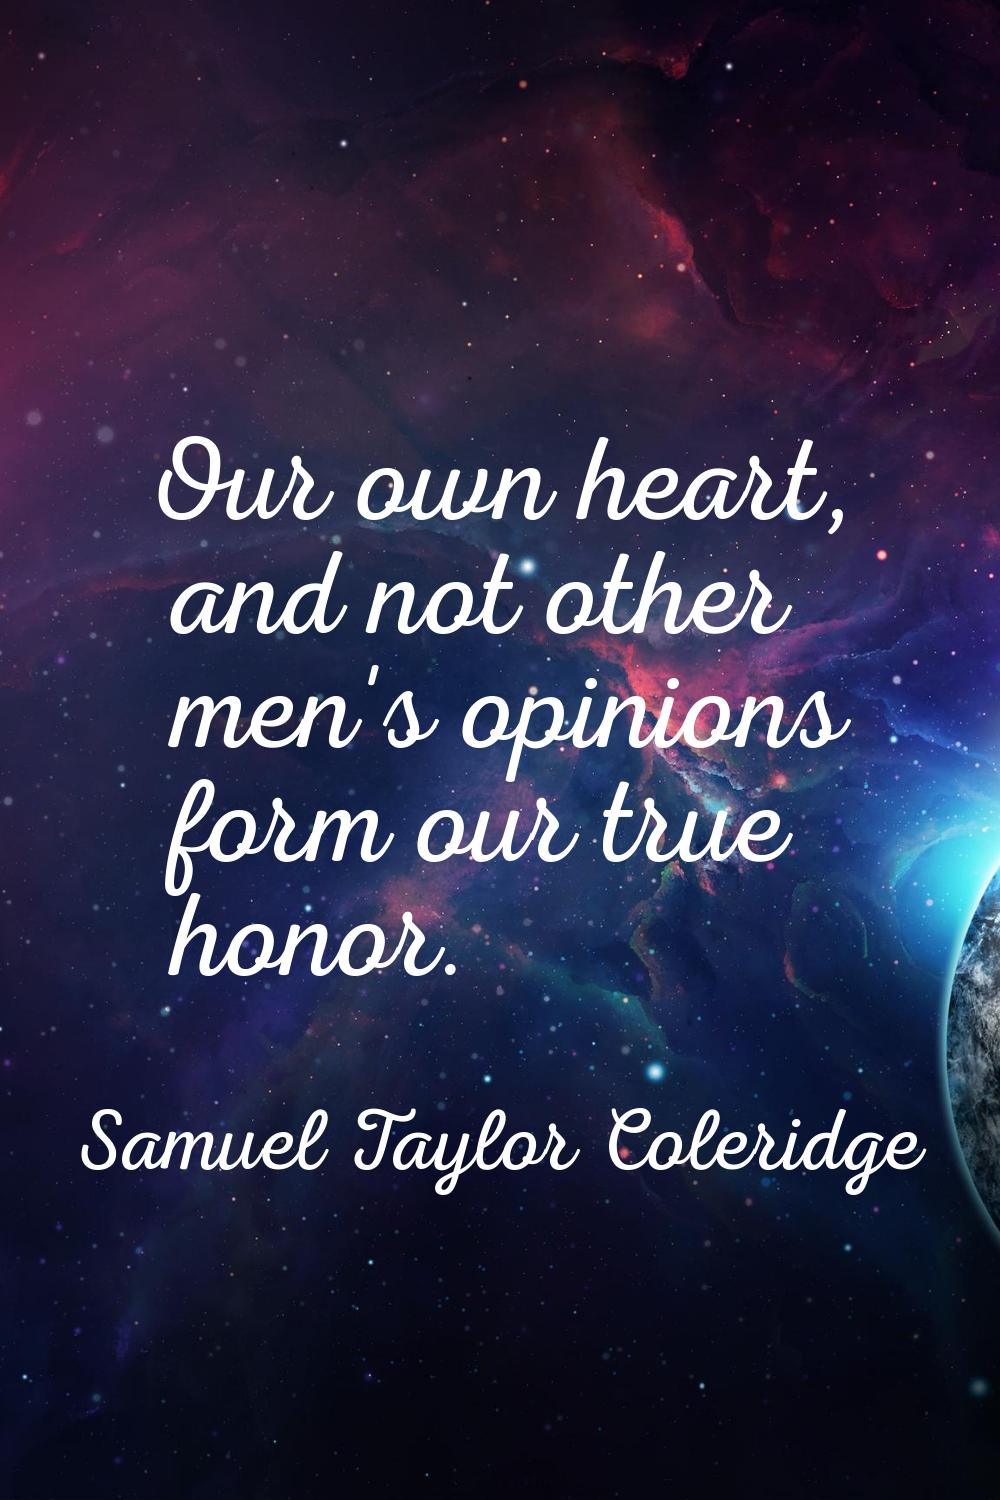 Our own heart, and not other men's opinions form our true honor.